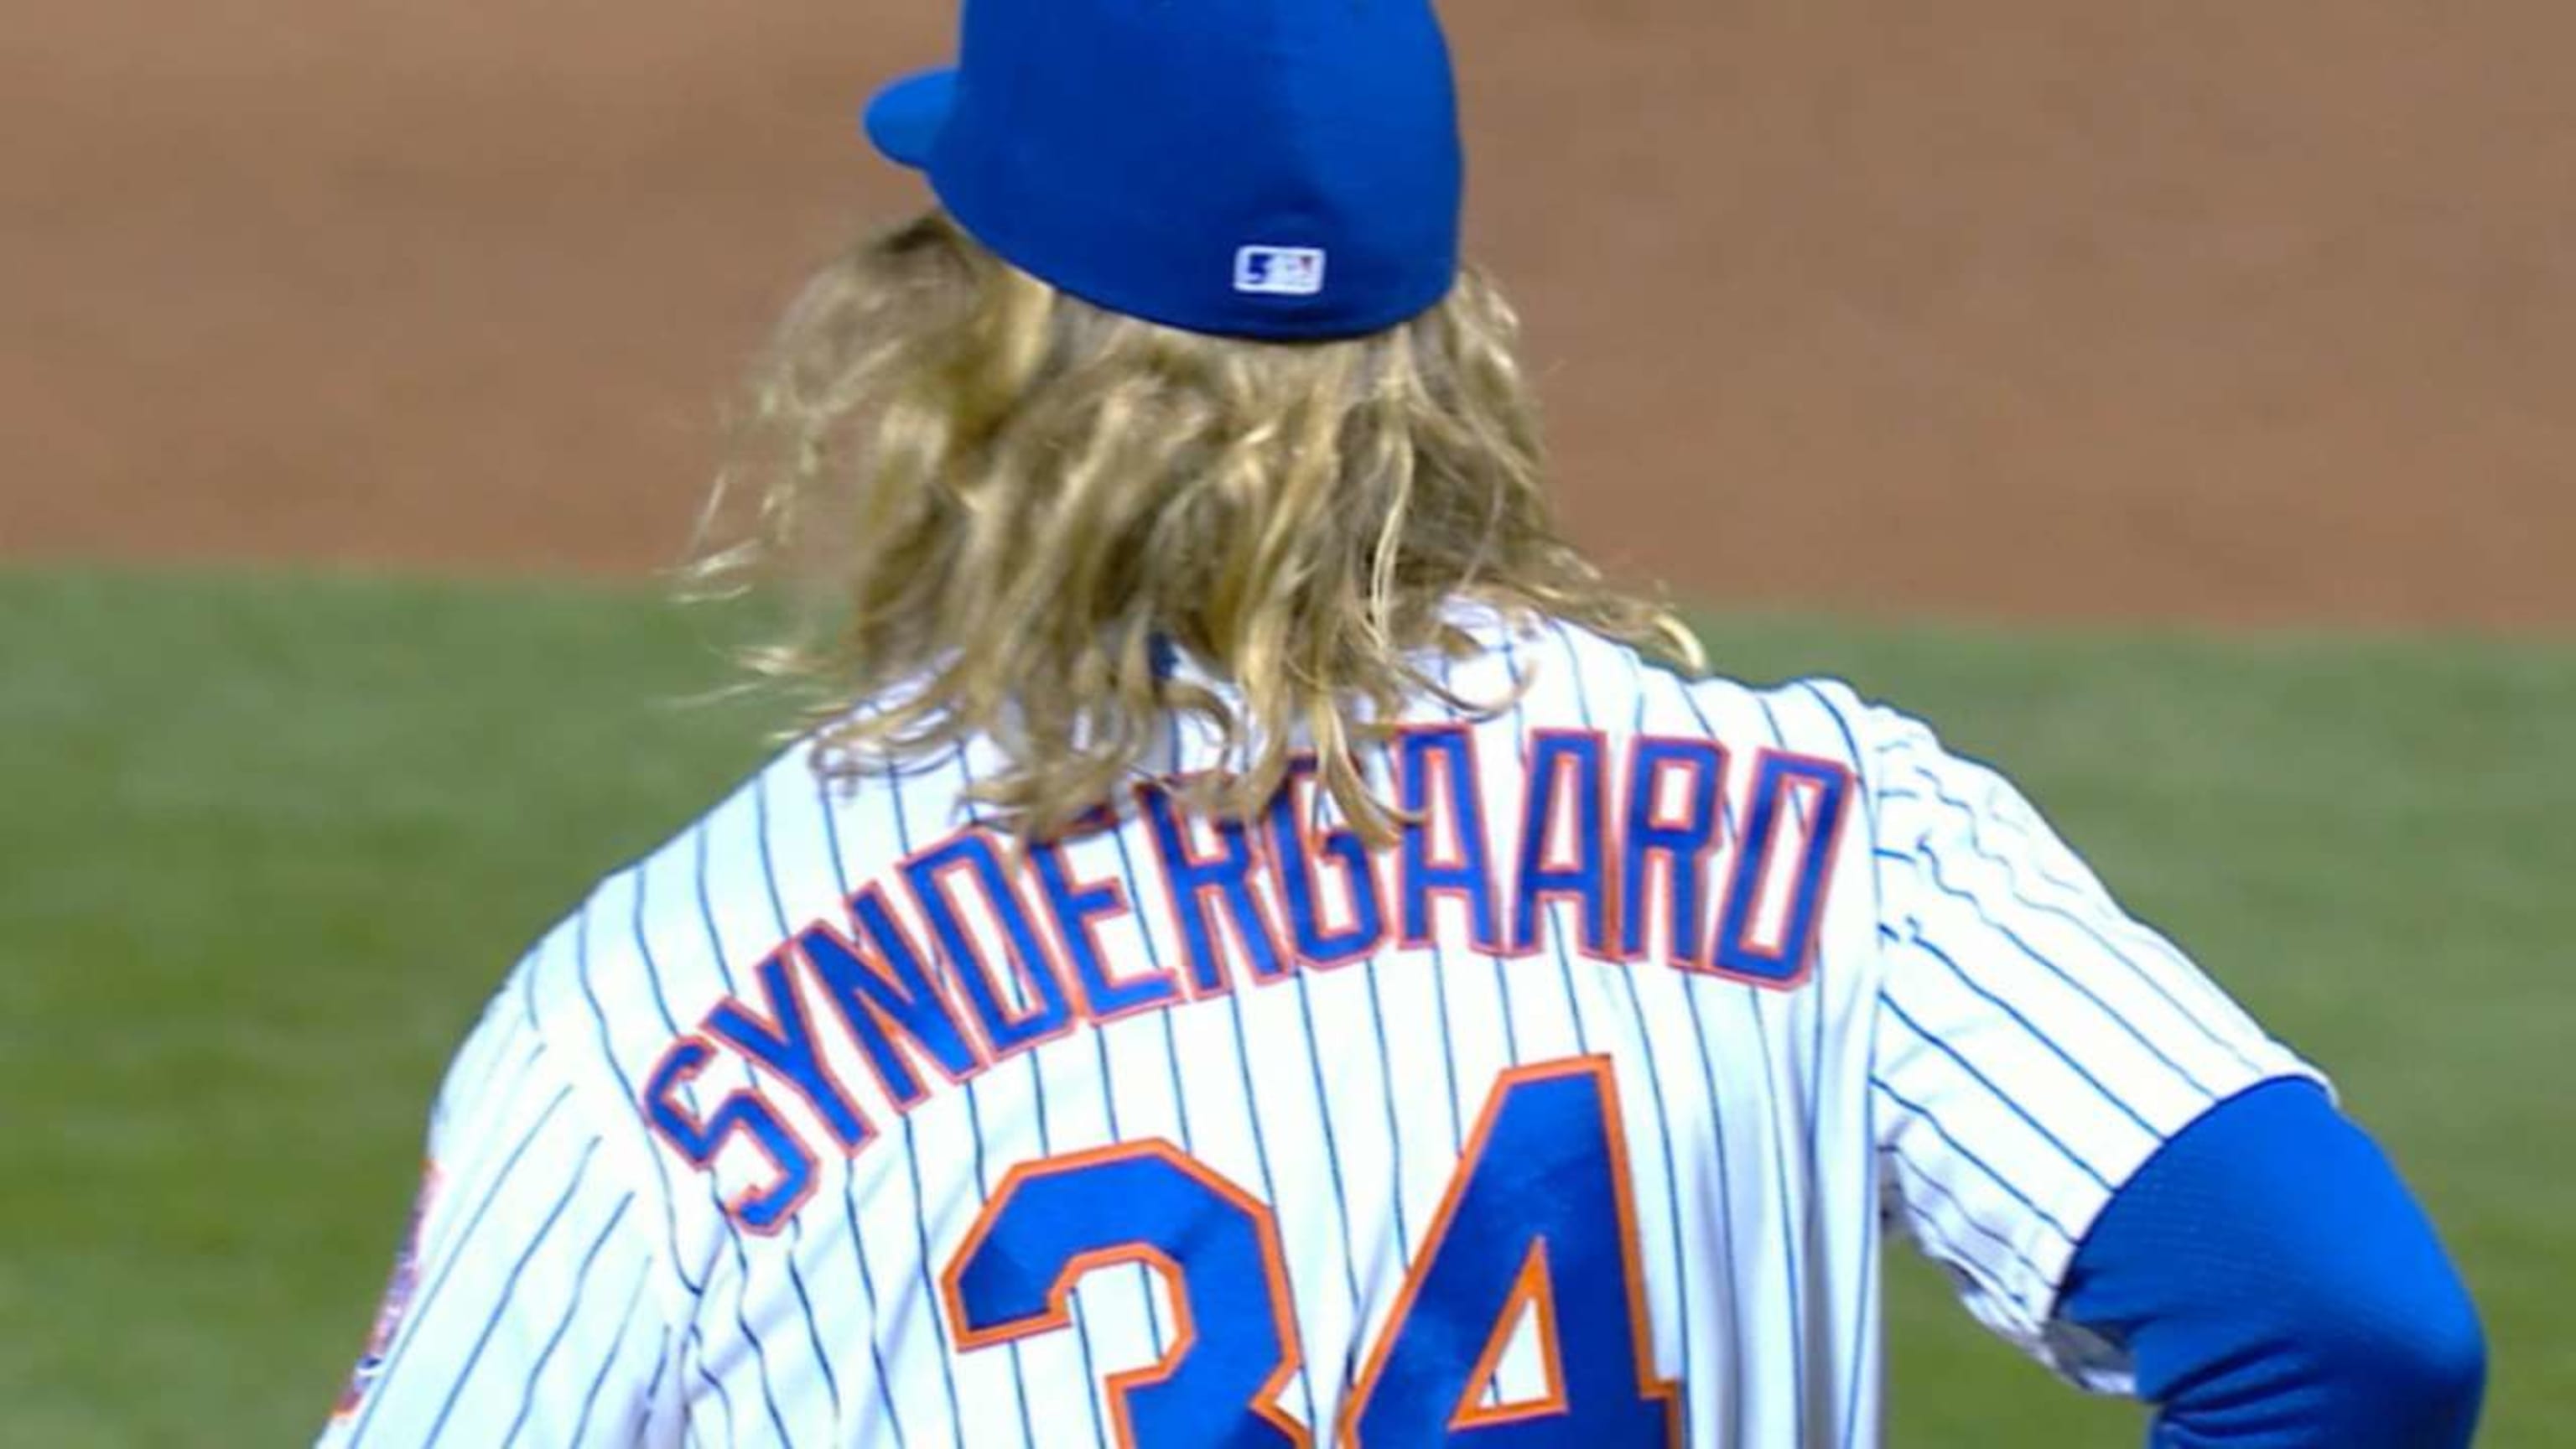 Noah Syndergaard's 12 K's proved that he's less of a pitcher, more of a  terrifying hitter's nightmare